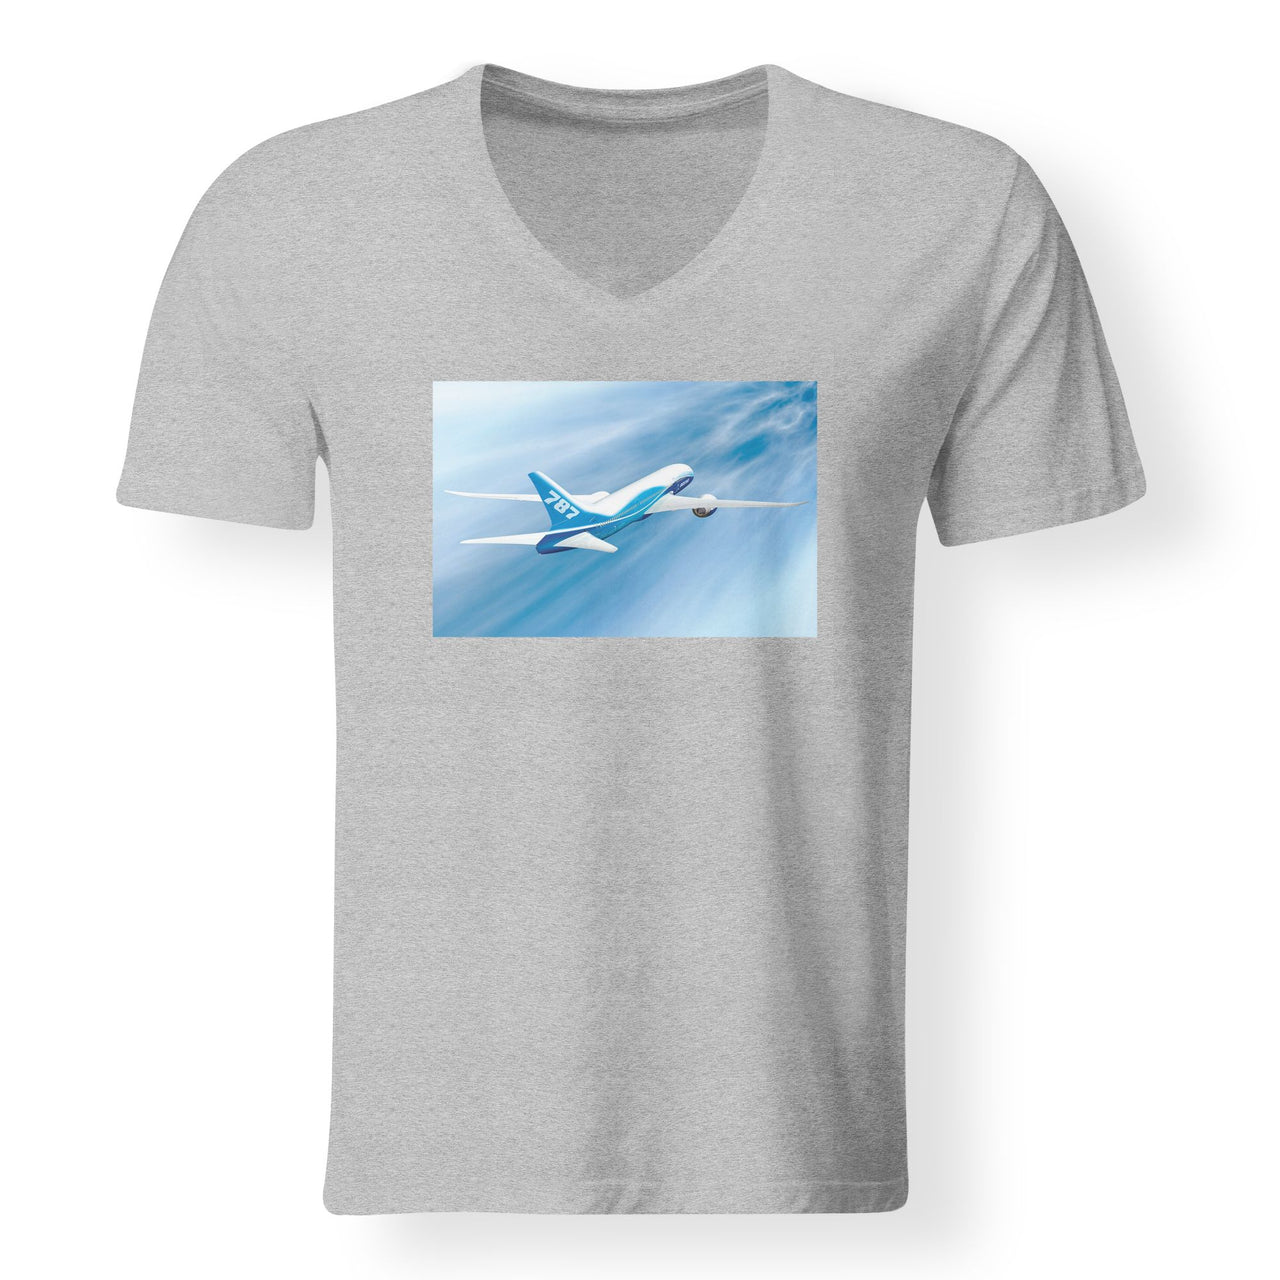 Beautiful Painting of Boeing 787 Dreamliner Designed V-Neck T-Shirts